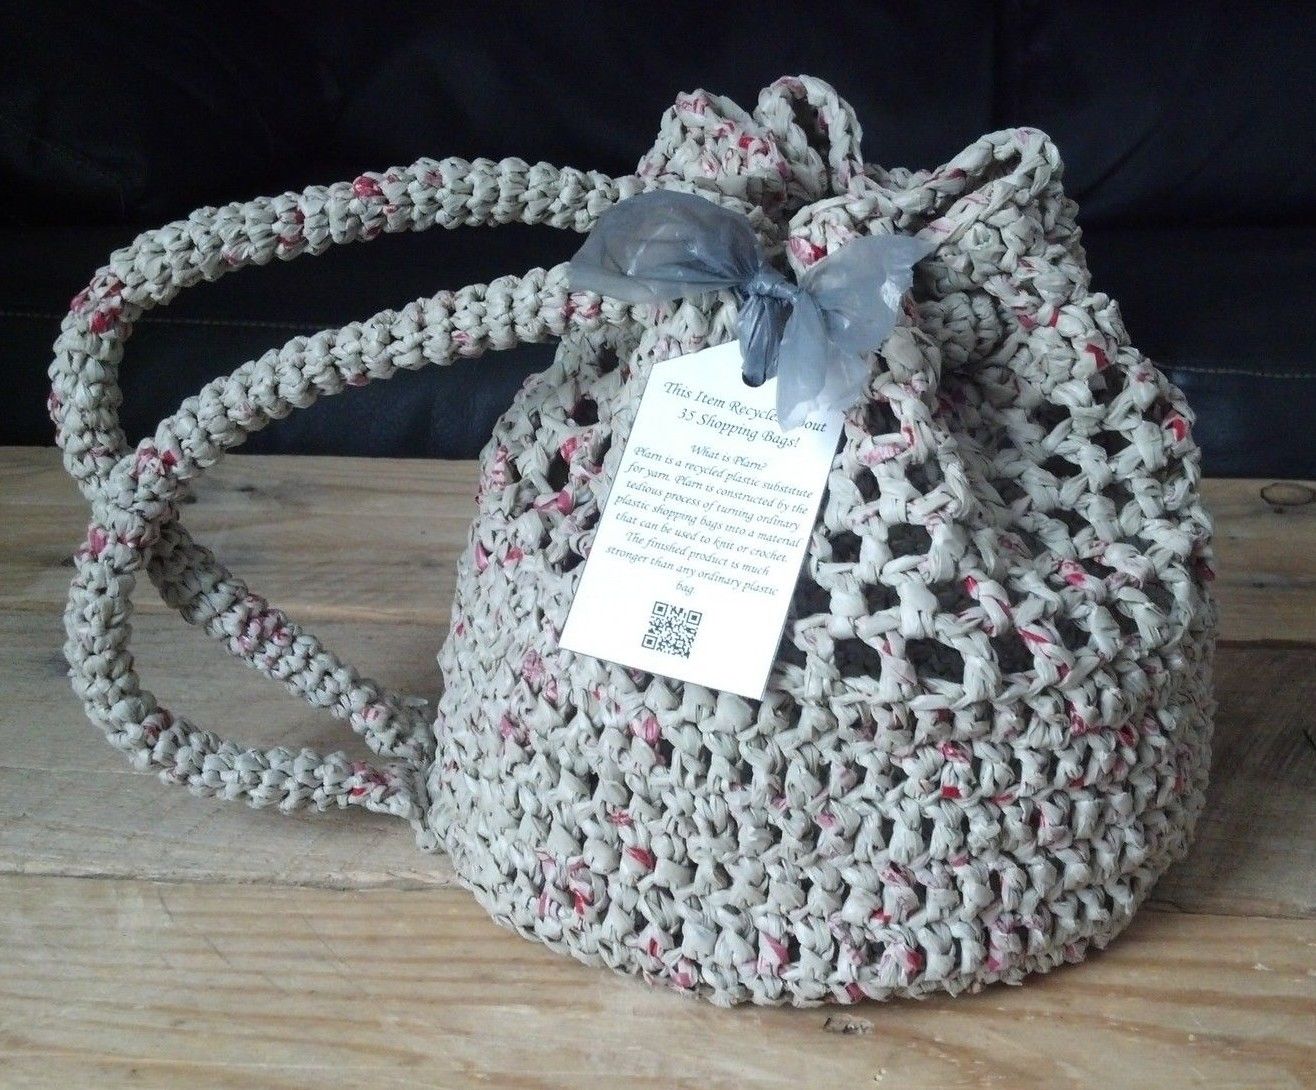 handbags made from recycled plastic bags